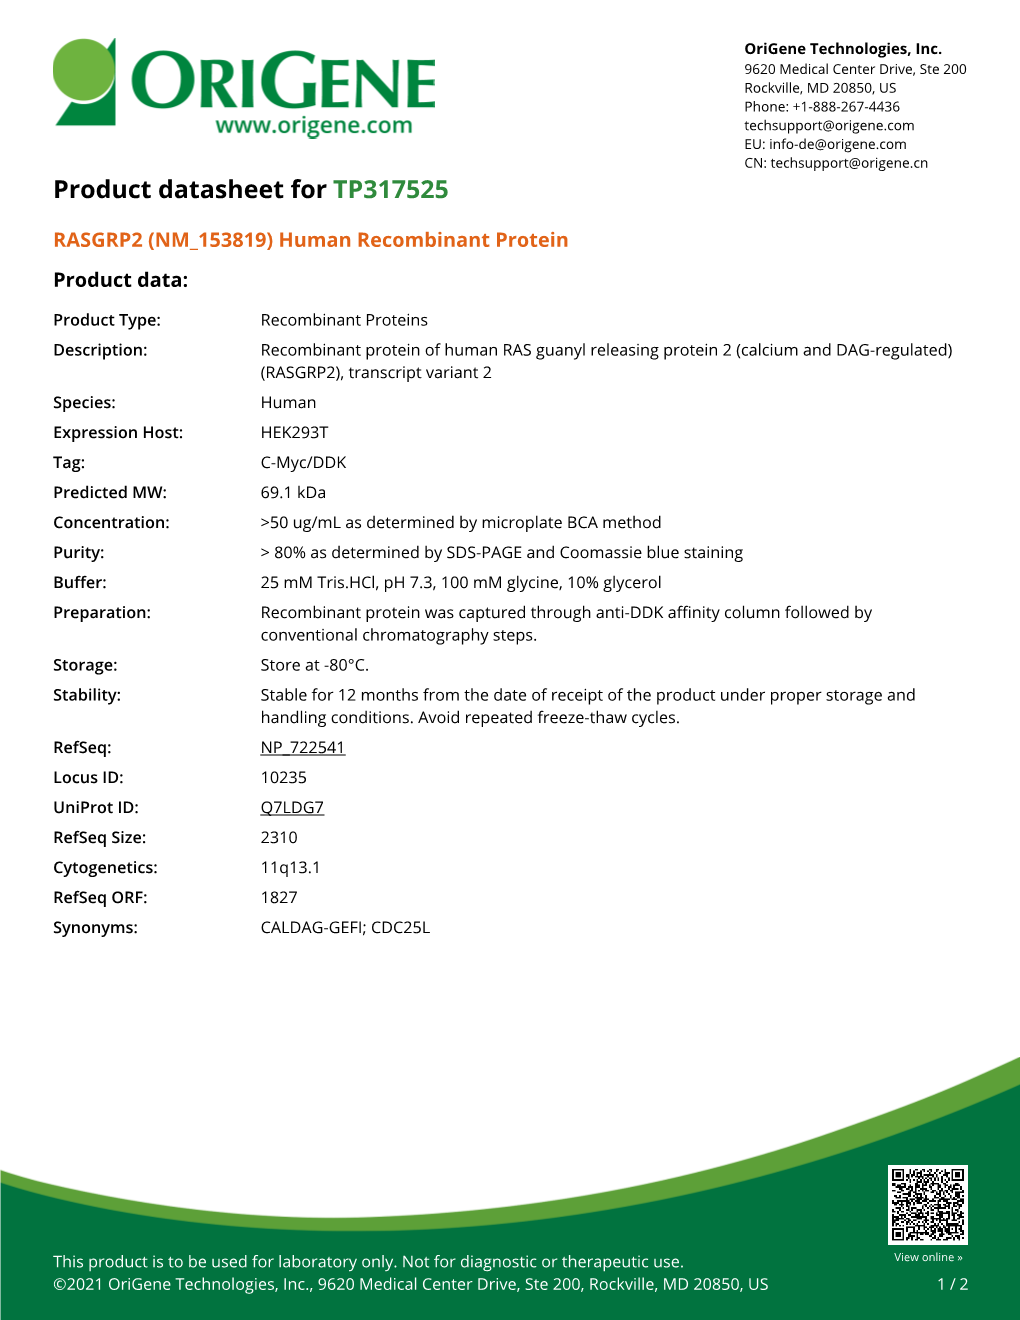 RASGRP2 (NM 153819) Human Recombinant Protein Product Data